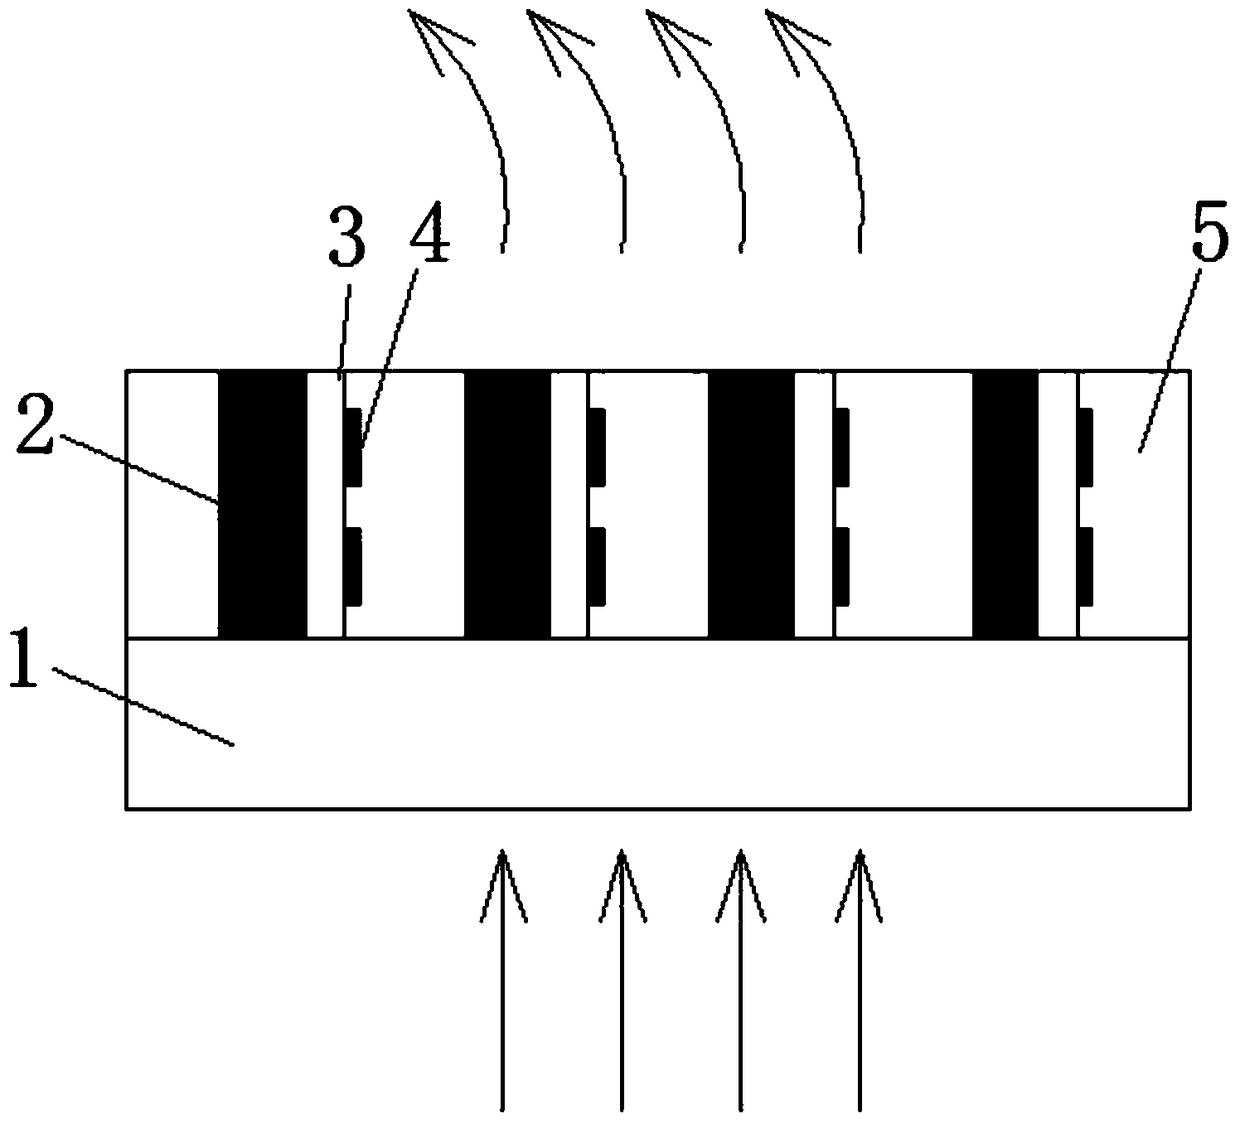 Structure capable of dynamically controlling bending beam